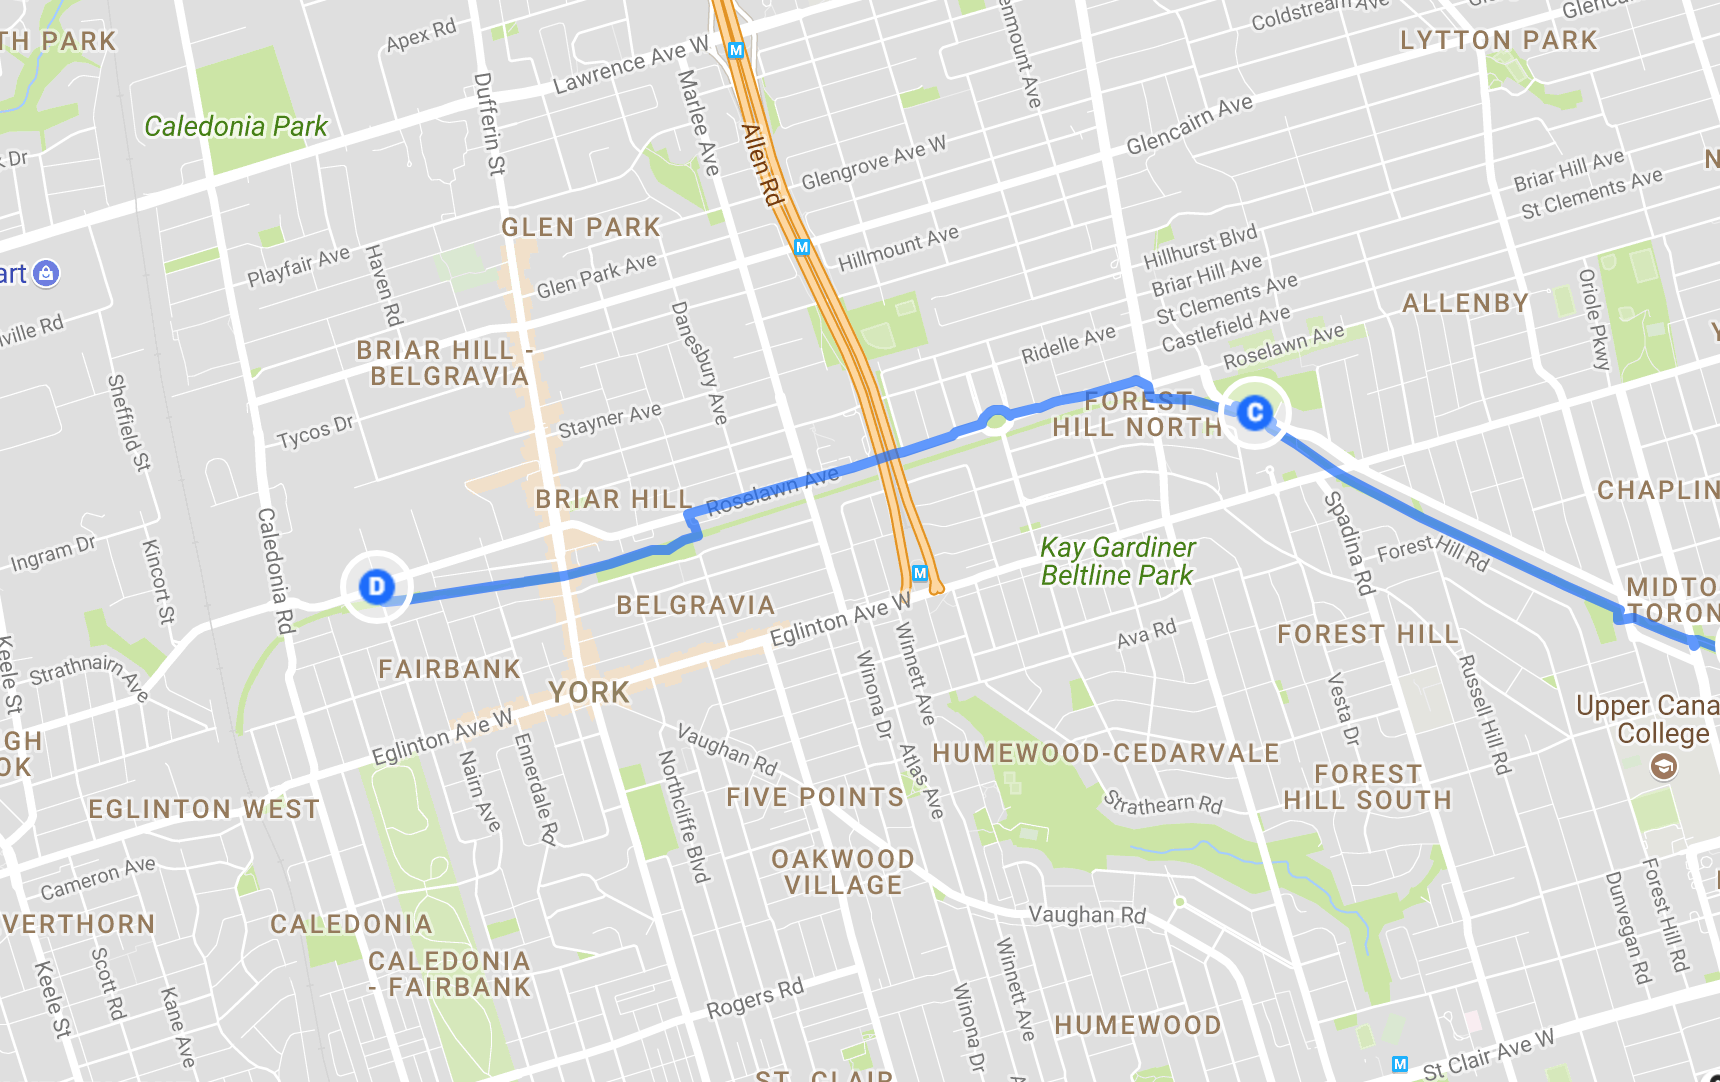 Map of route from Memorial Park westward